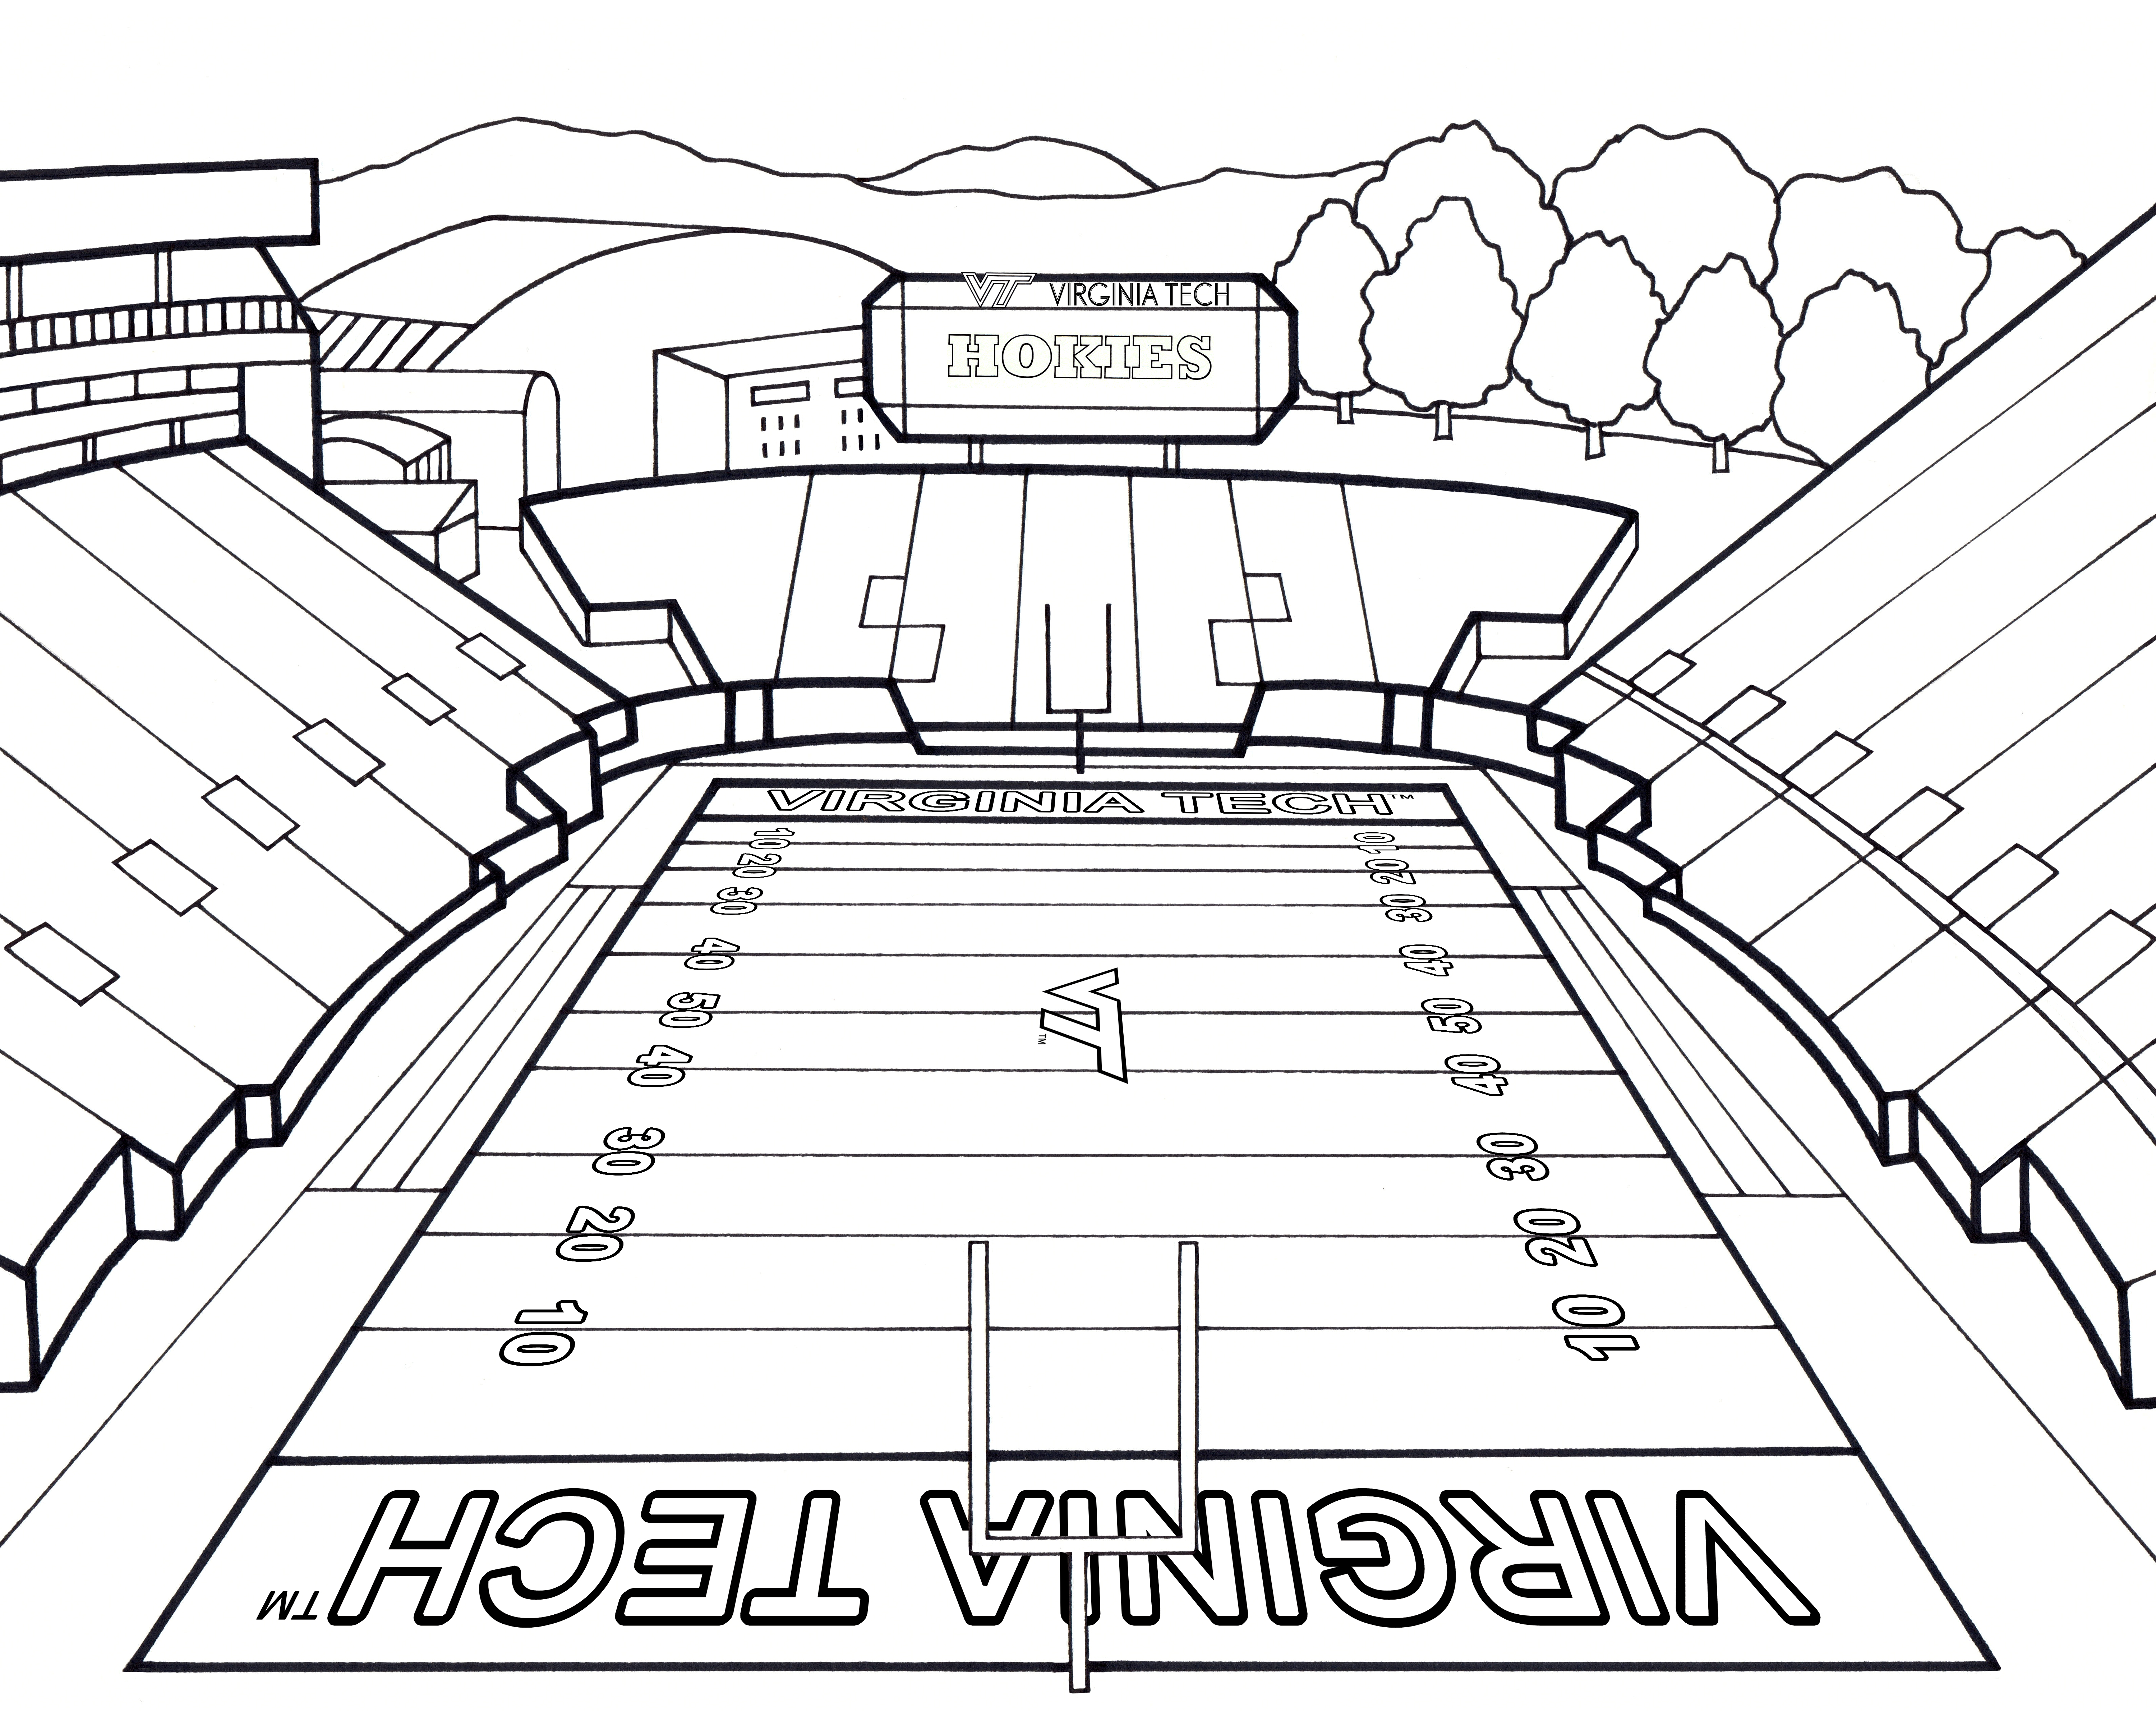 Coloring Pages Alumni Relations Virginia Tech